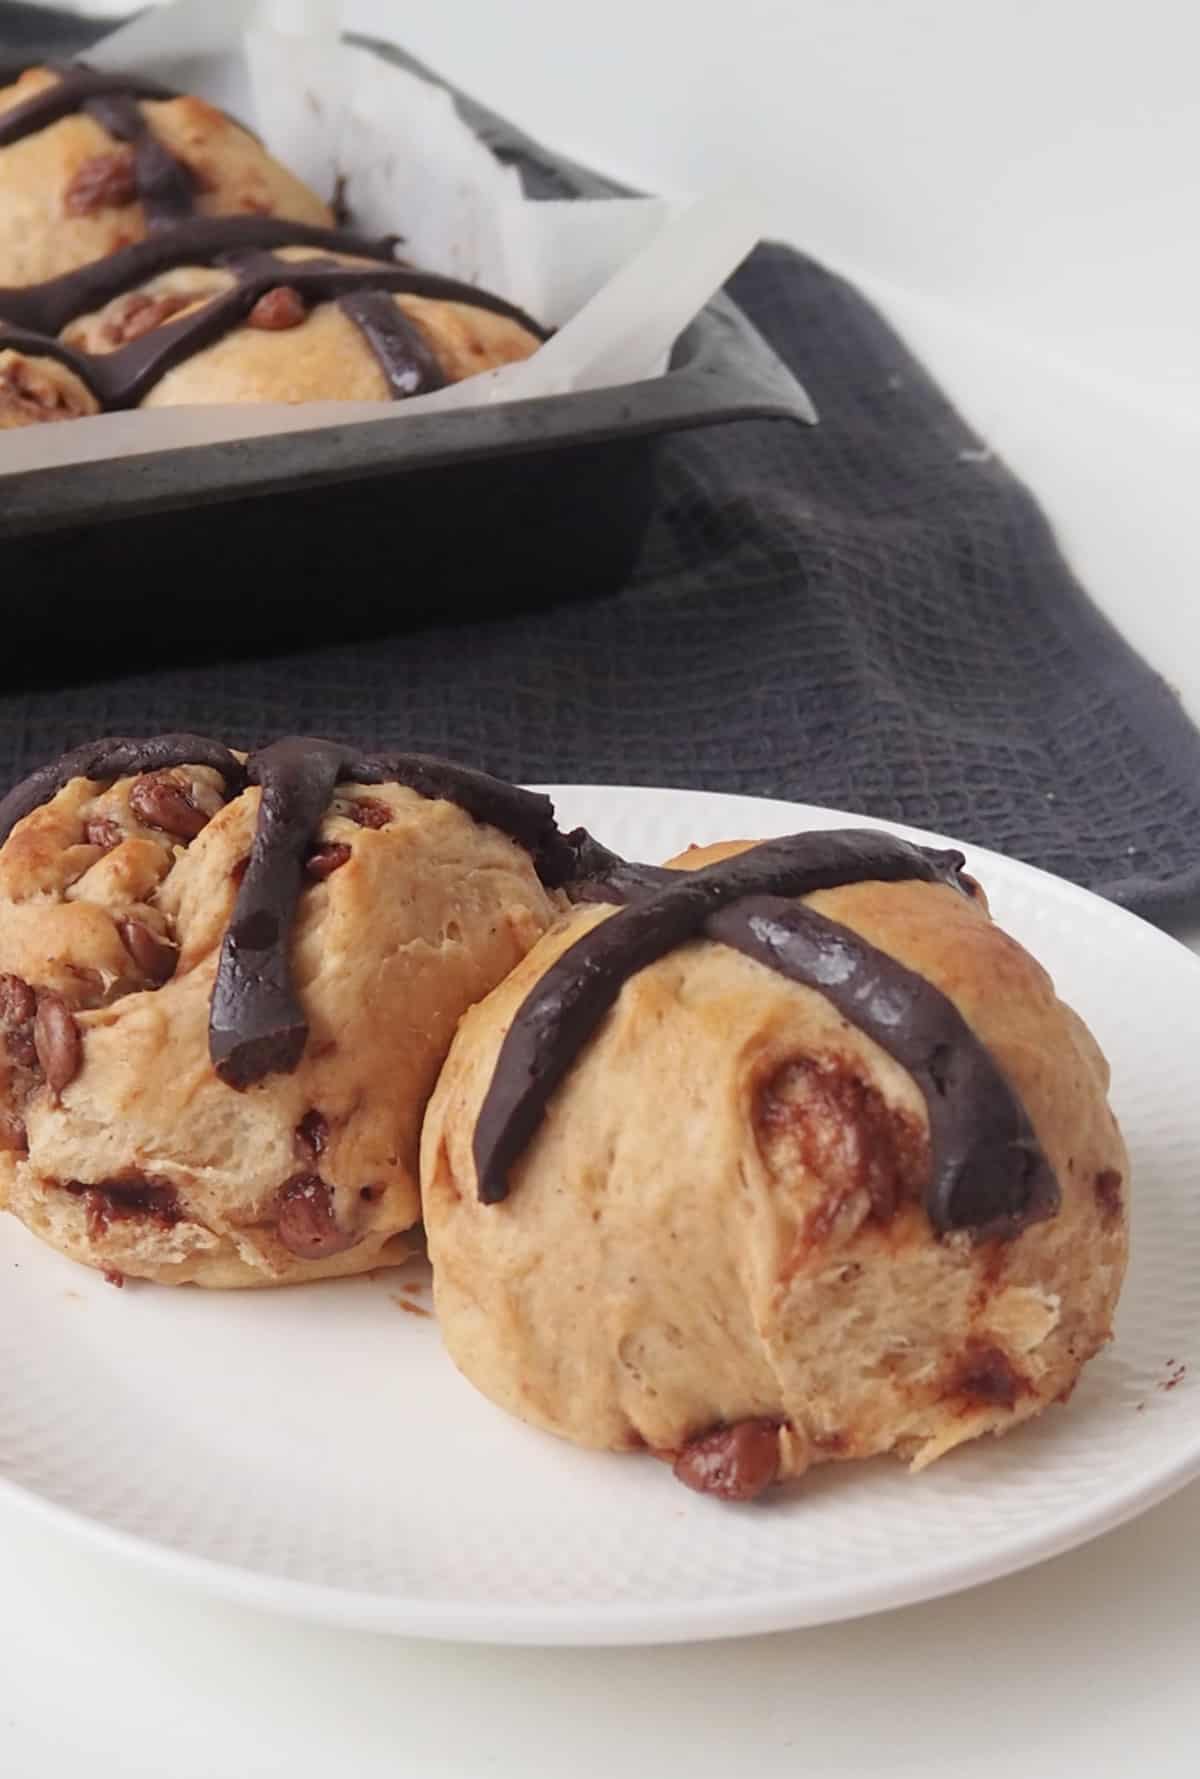 Two Chocolate Chip Hot Cross Buns on a white plate.